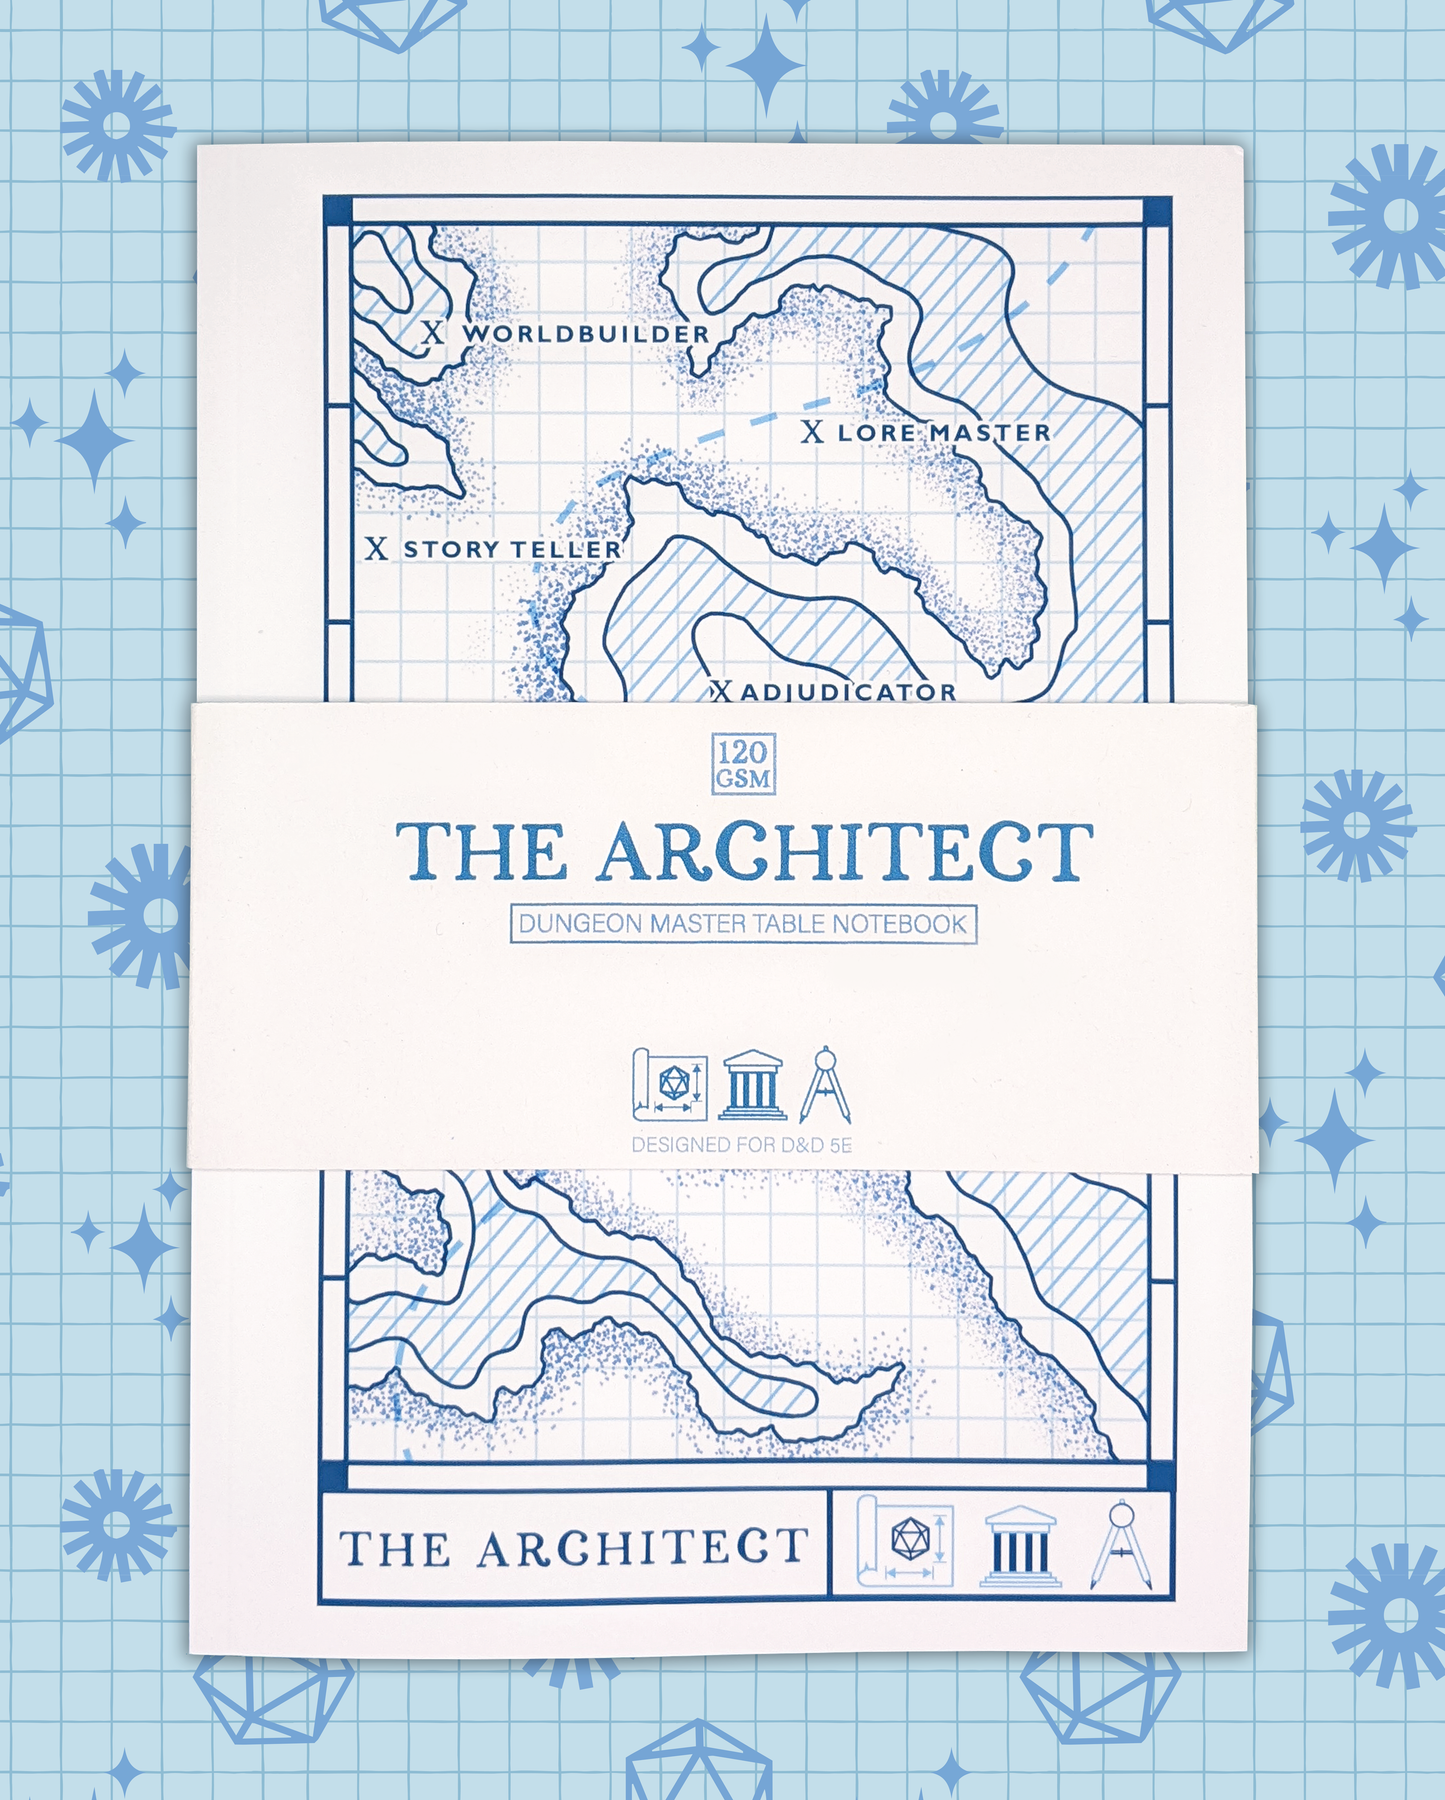 [The Architect] Dungeon Master's Table Notebook